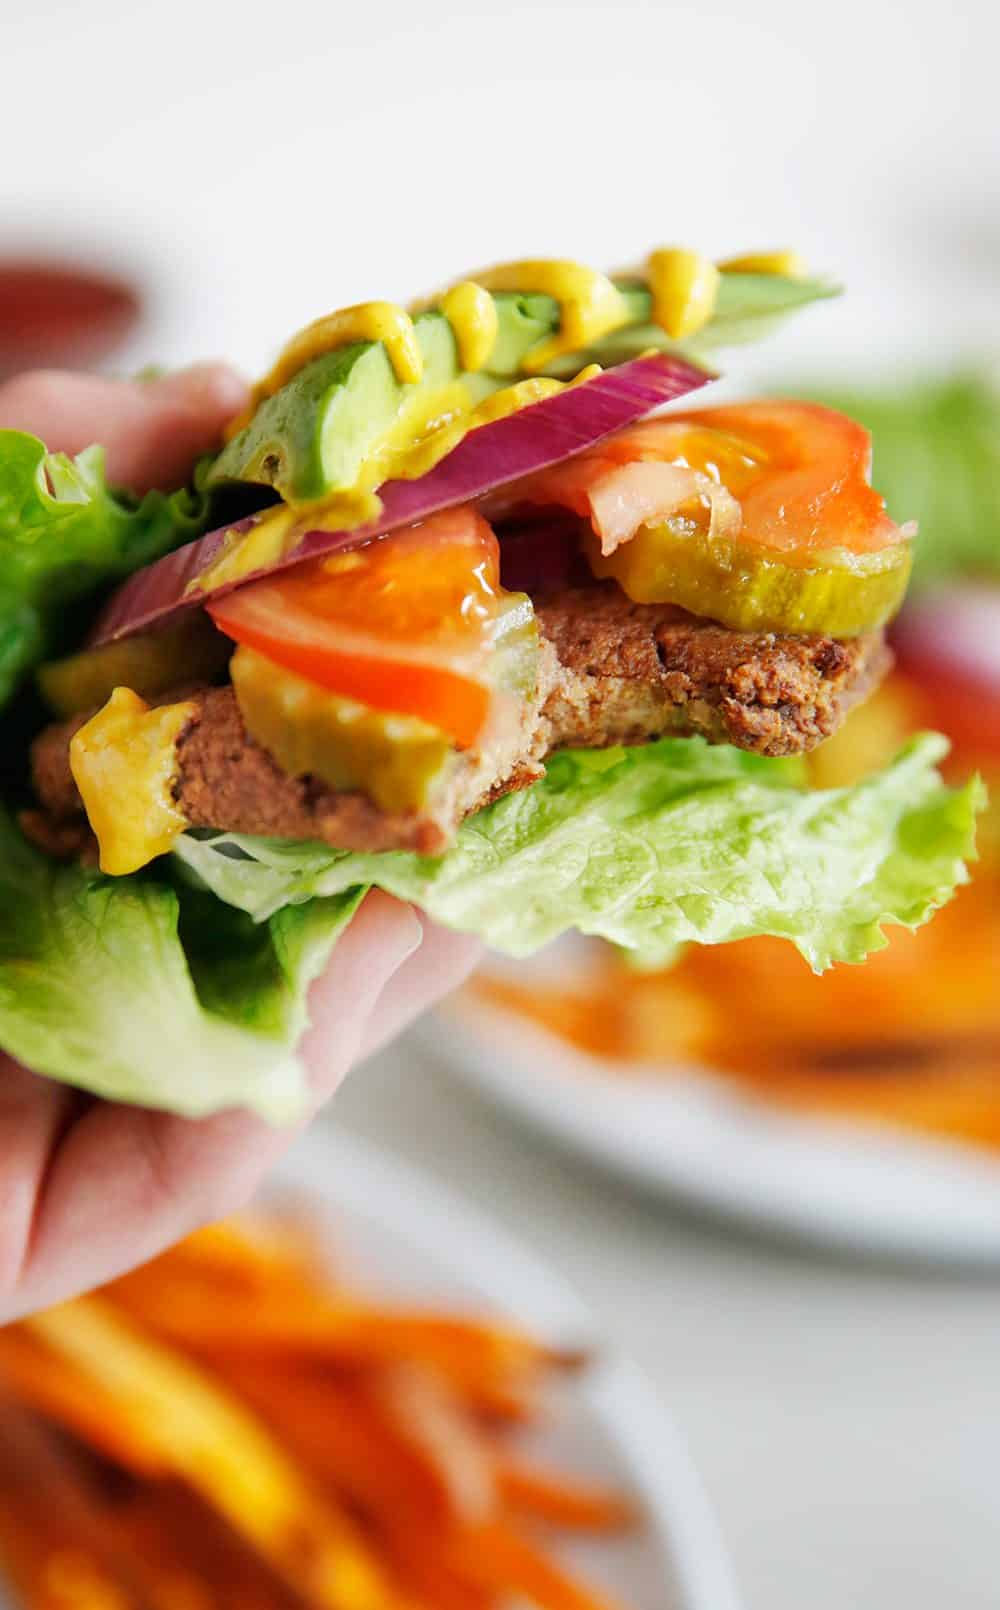 Meatless Mushroom Burgers in a lettuce wrap with burger toppings.